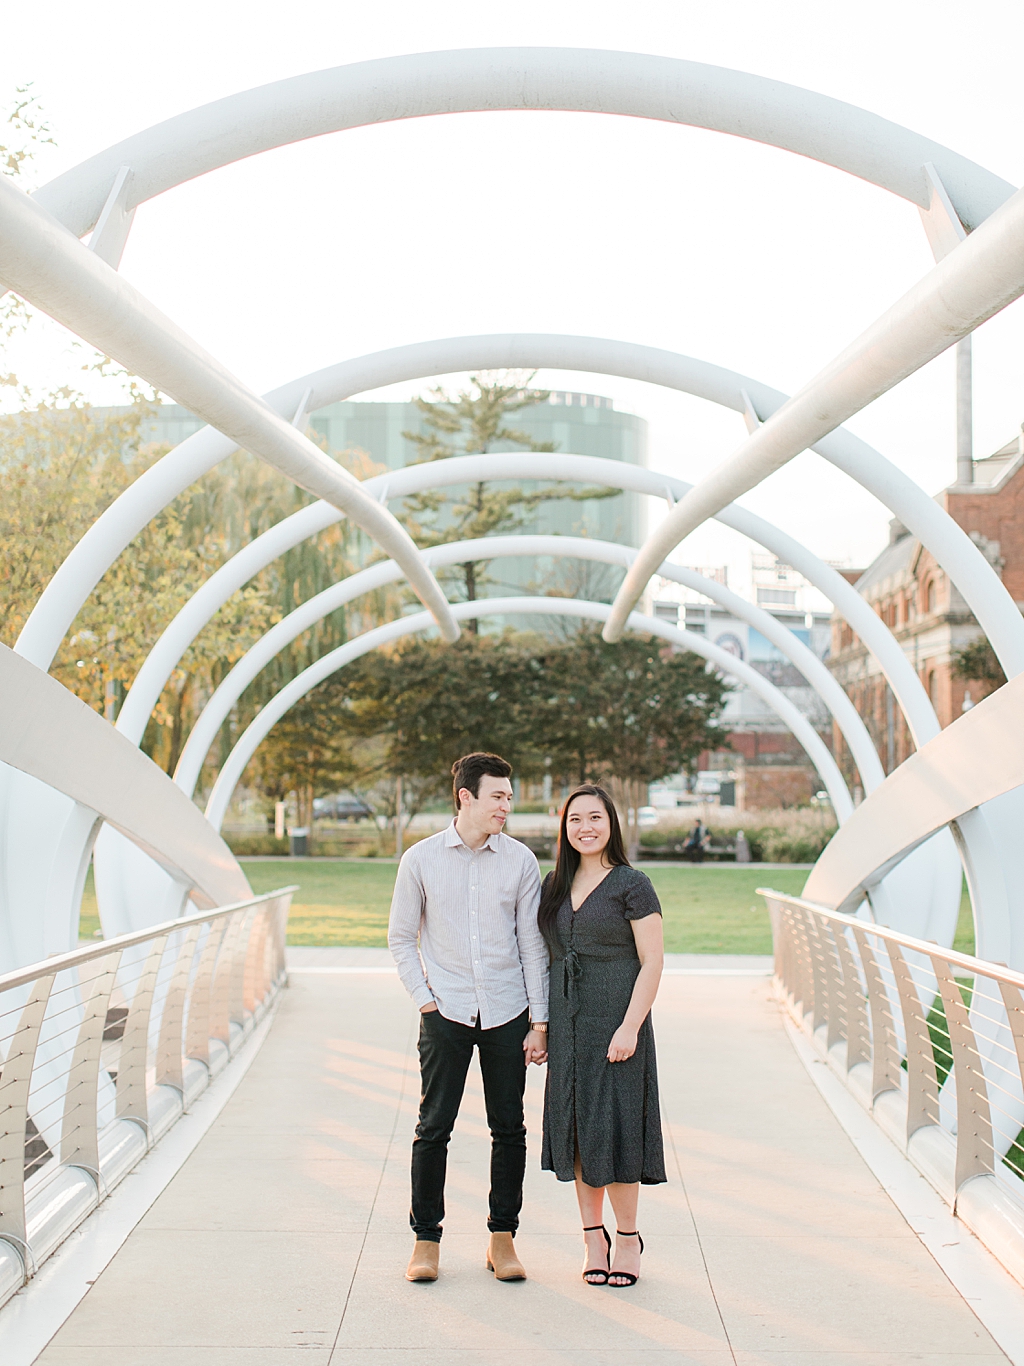 Becky_Collin_Navy_Yards_Park_The_Wharf_Washington_DC_Fall_Engagement_Session_AngelikaJohnsPhotography-7984.jpg